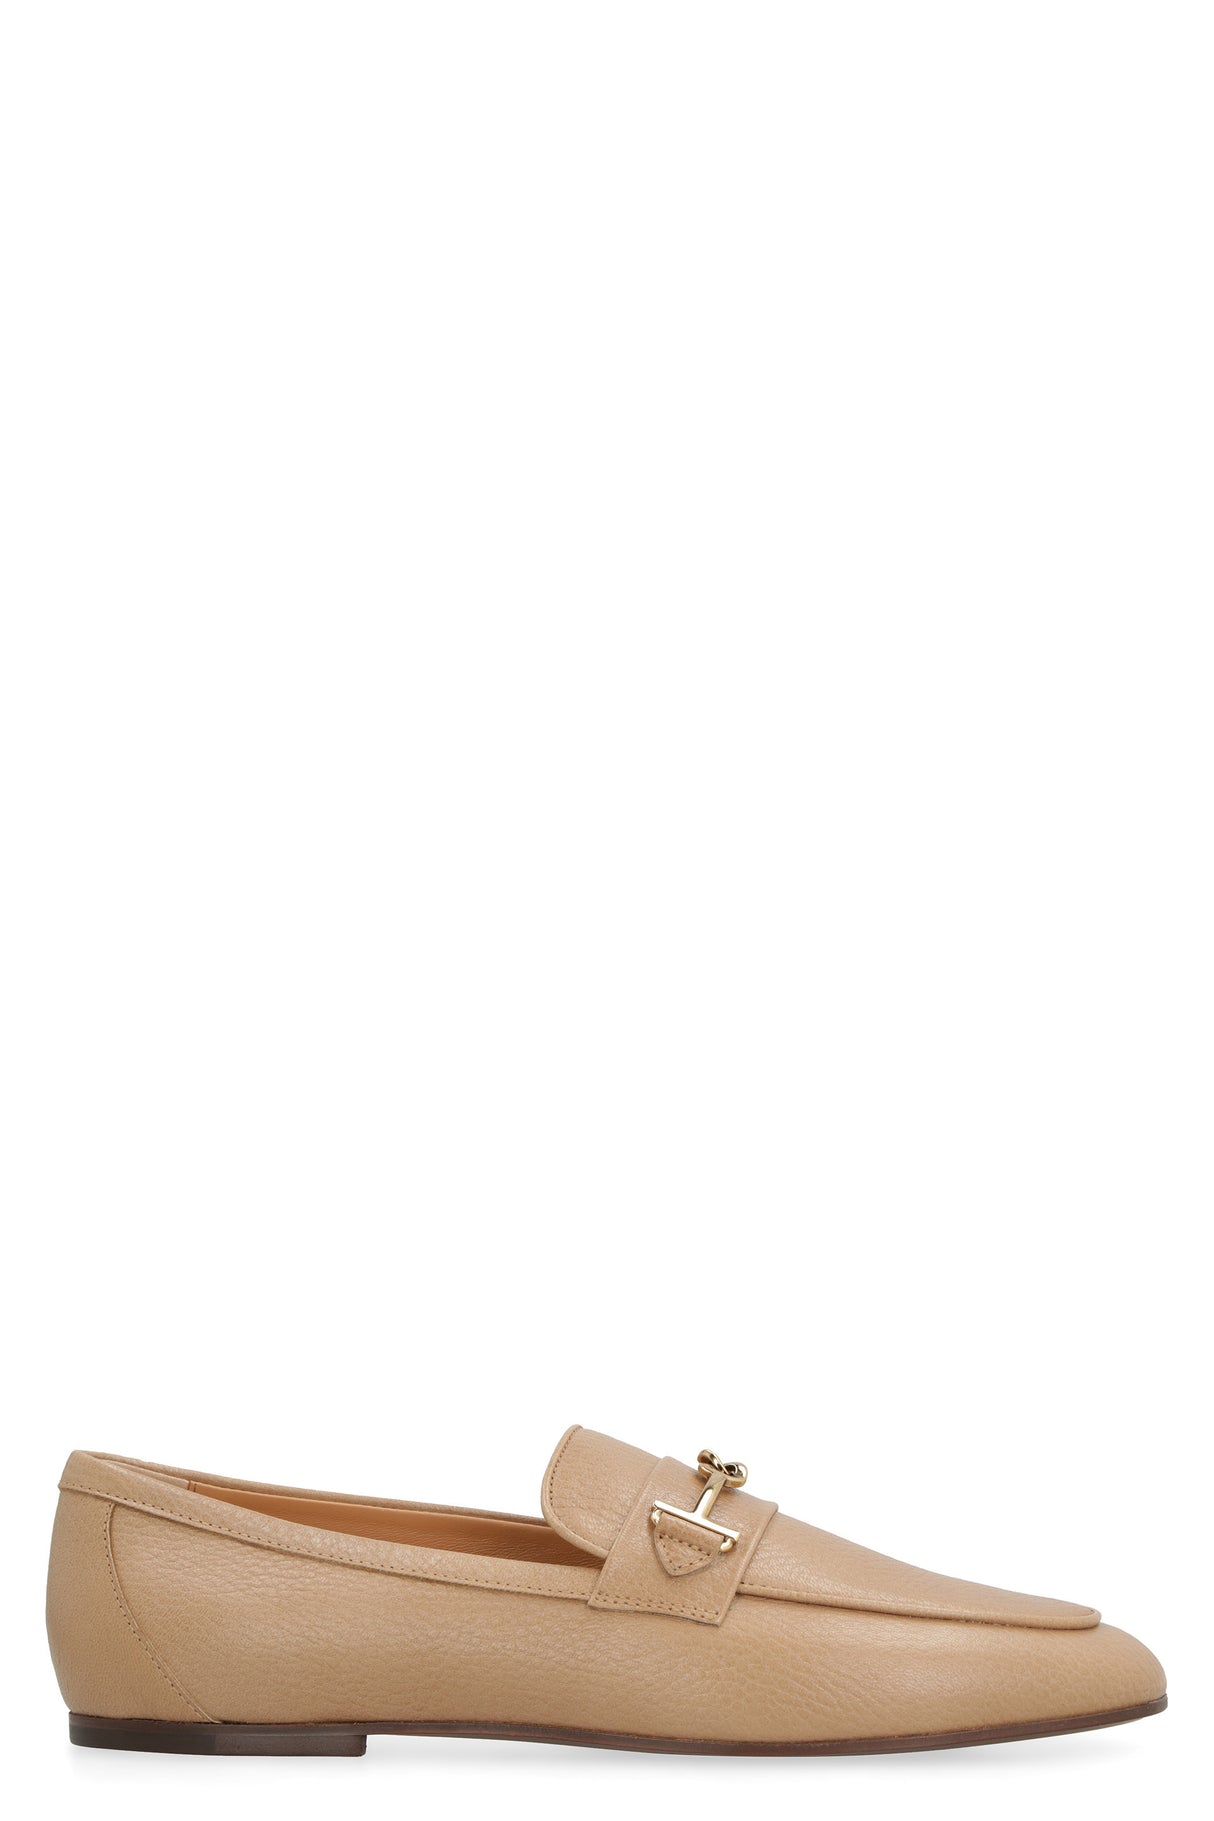 TOD'S Beige Leather Loafers with Bow for Women